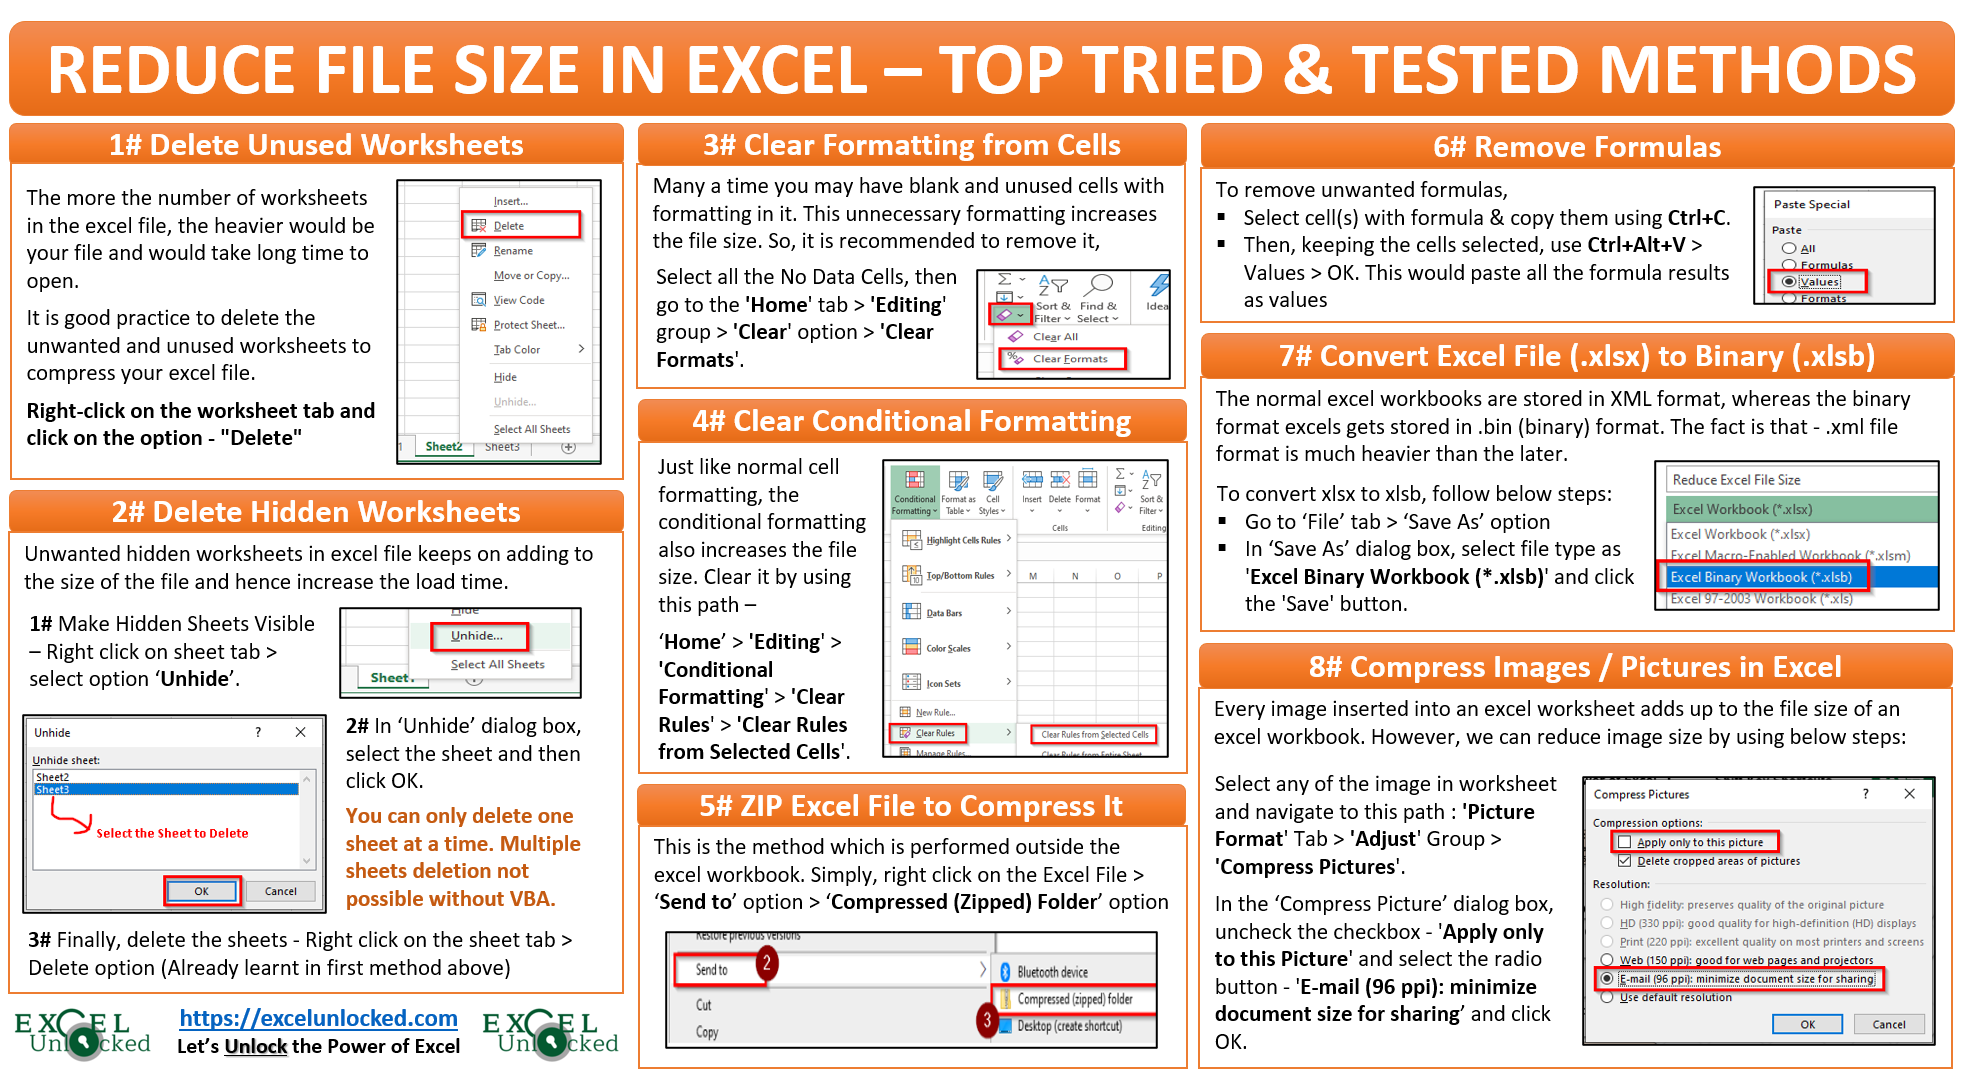 multiple-ways-to-reduce-excel-file-size-excel-unlocked